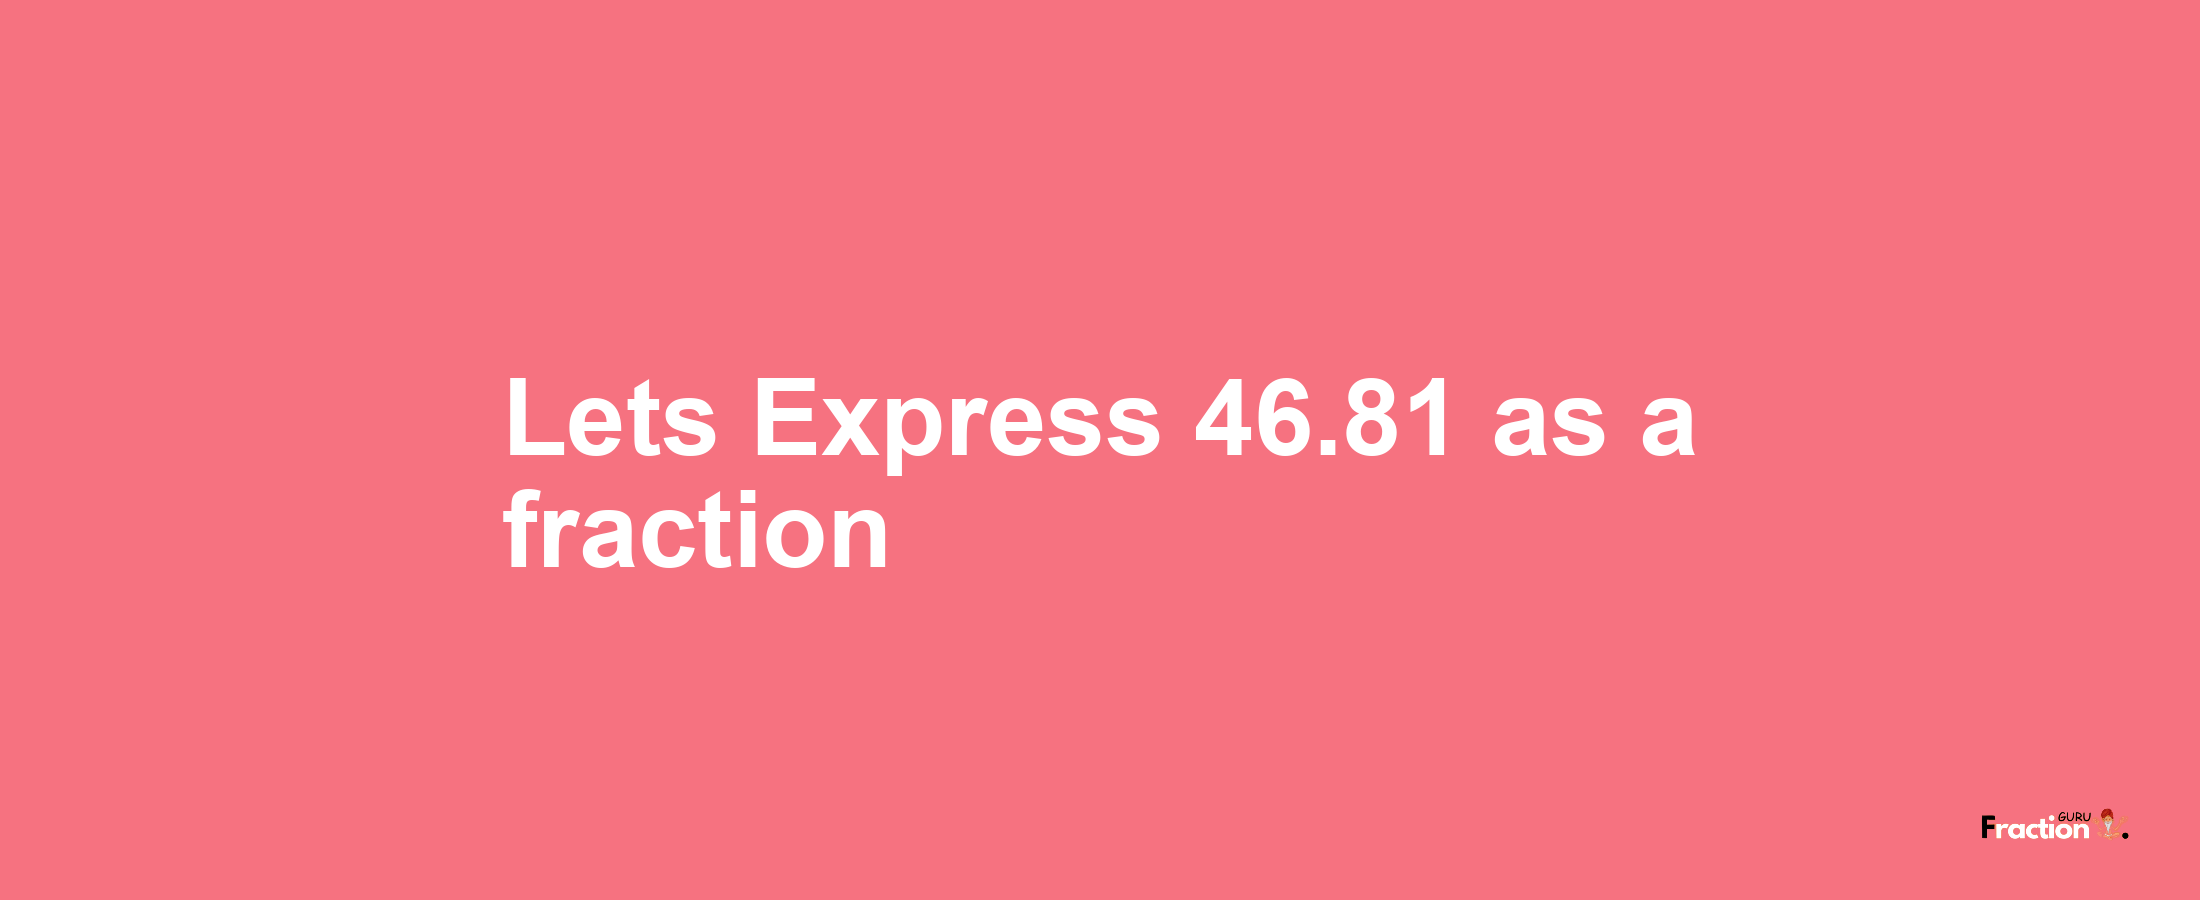 Lets Express 46.81 as afraction